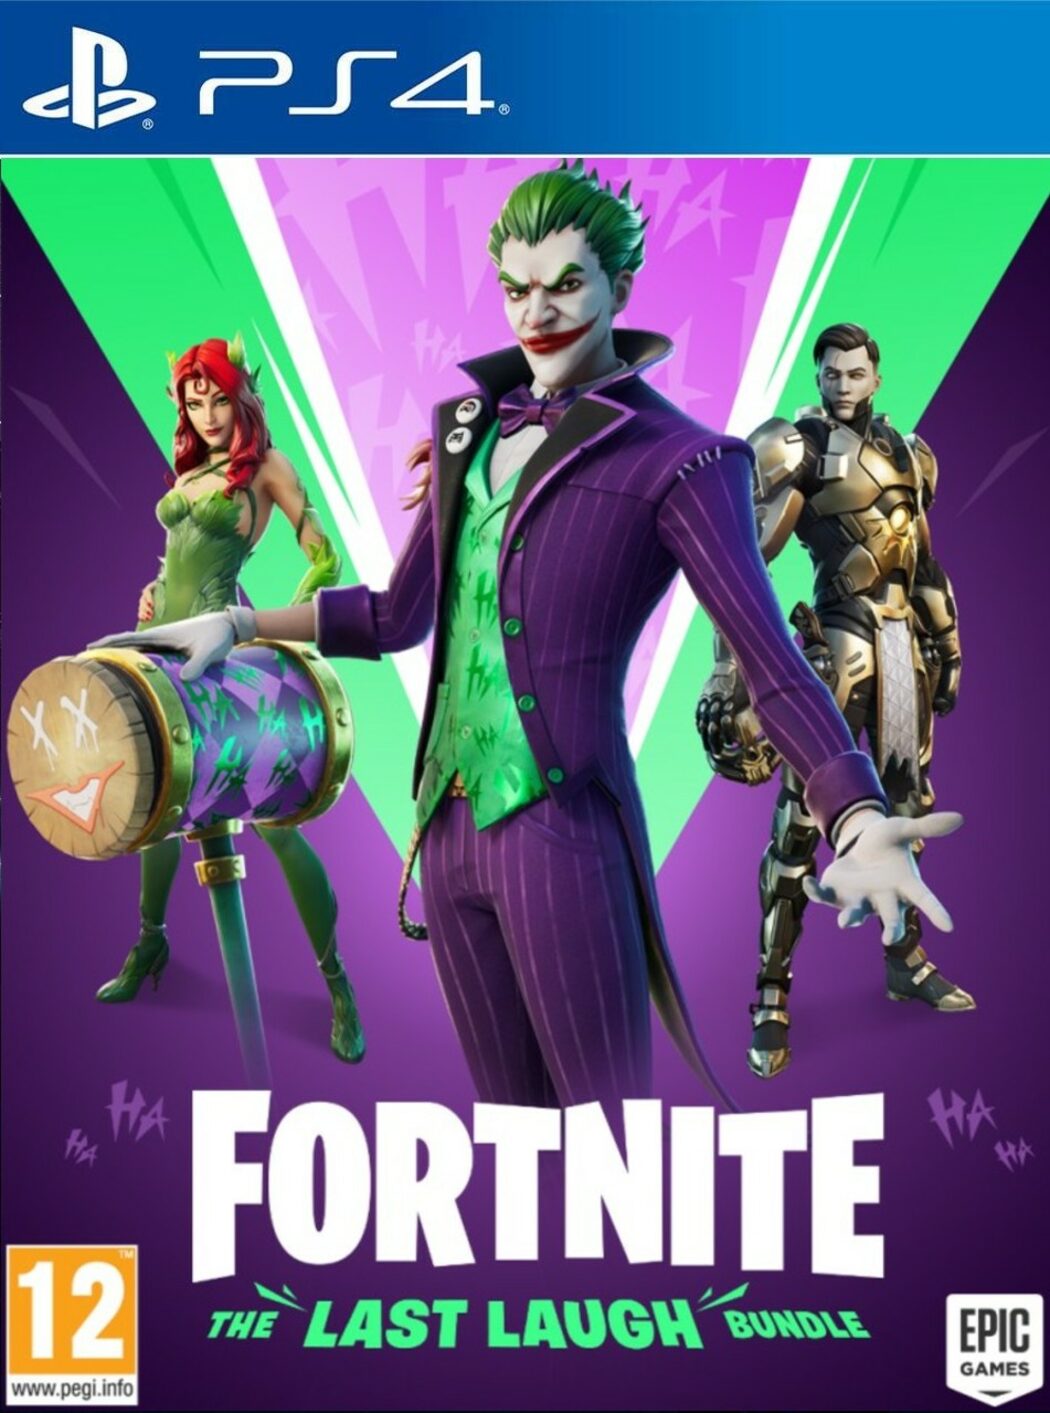 where can i buy fortnite for ps4